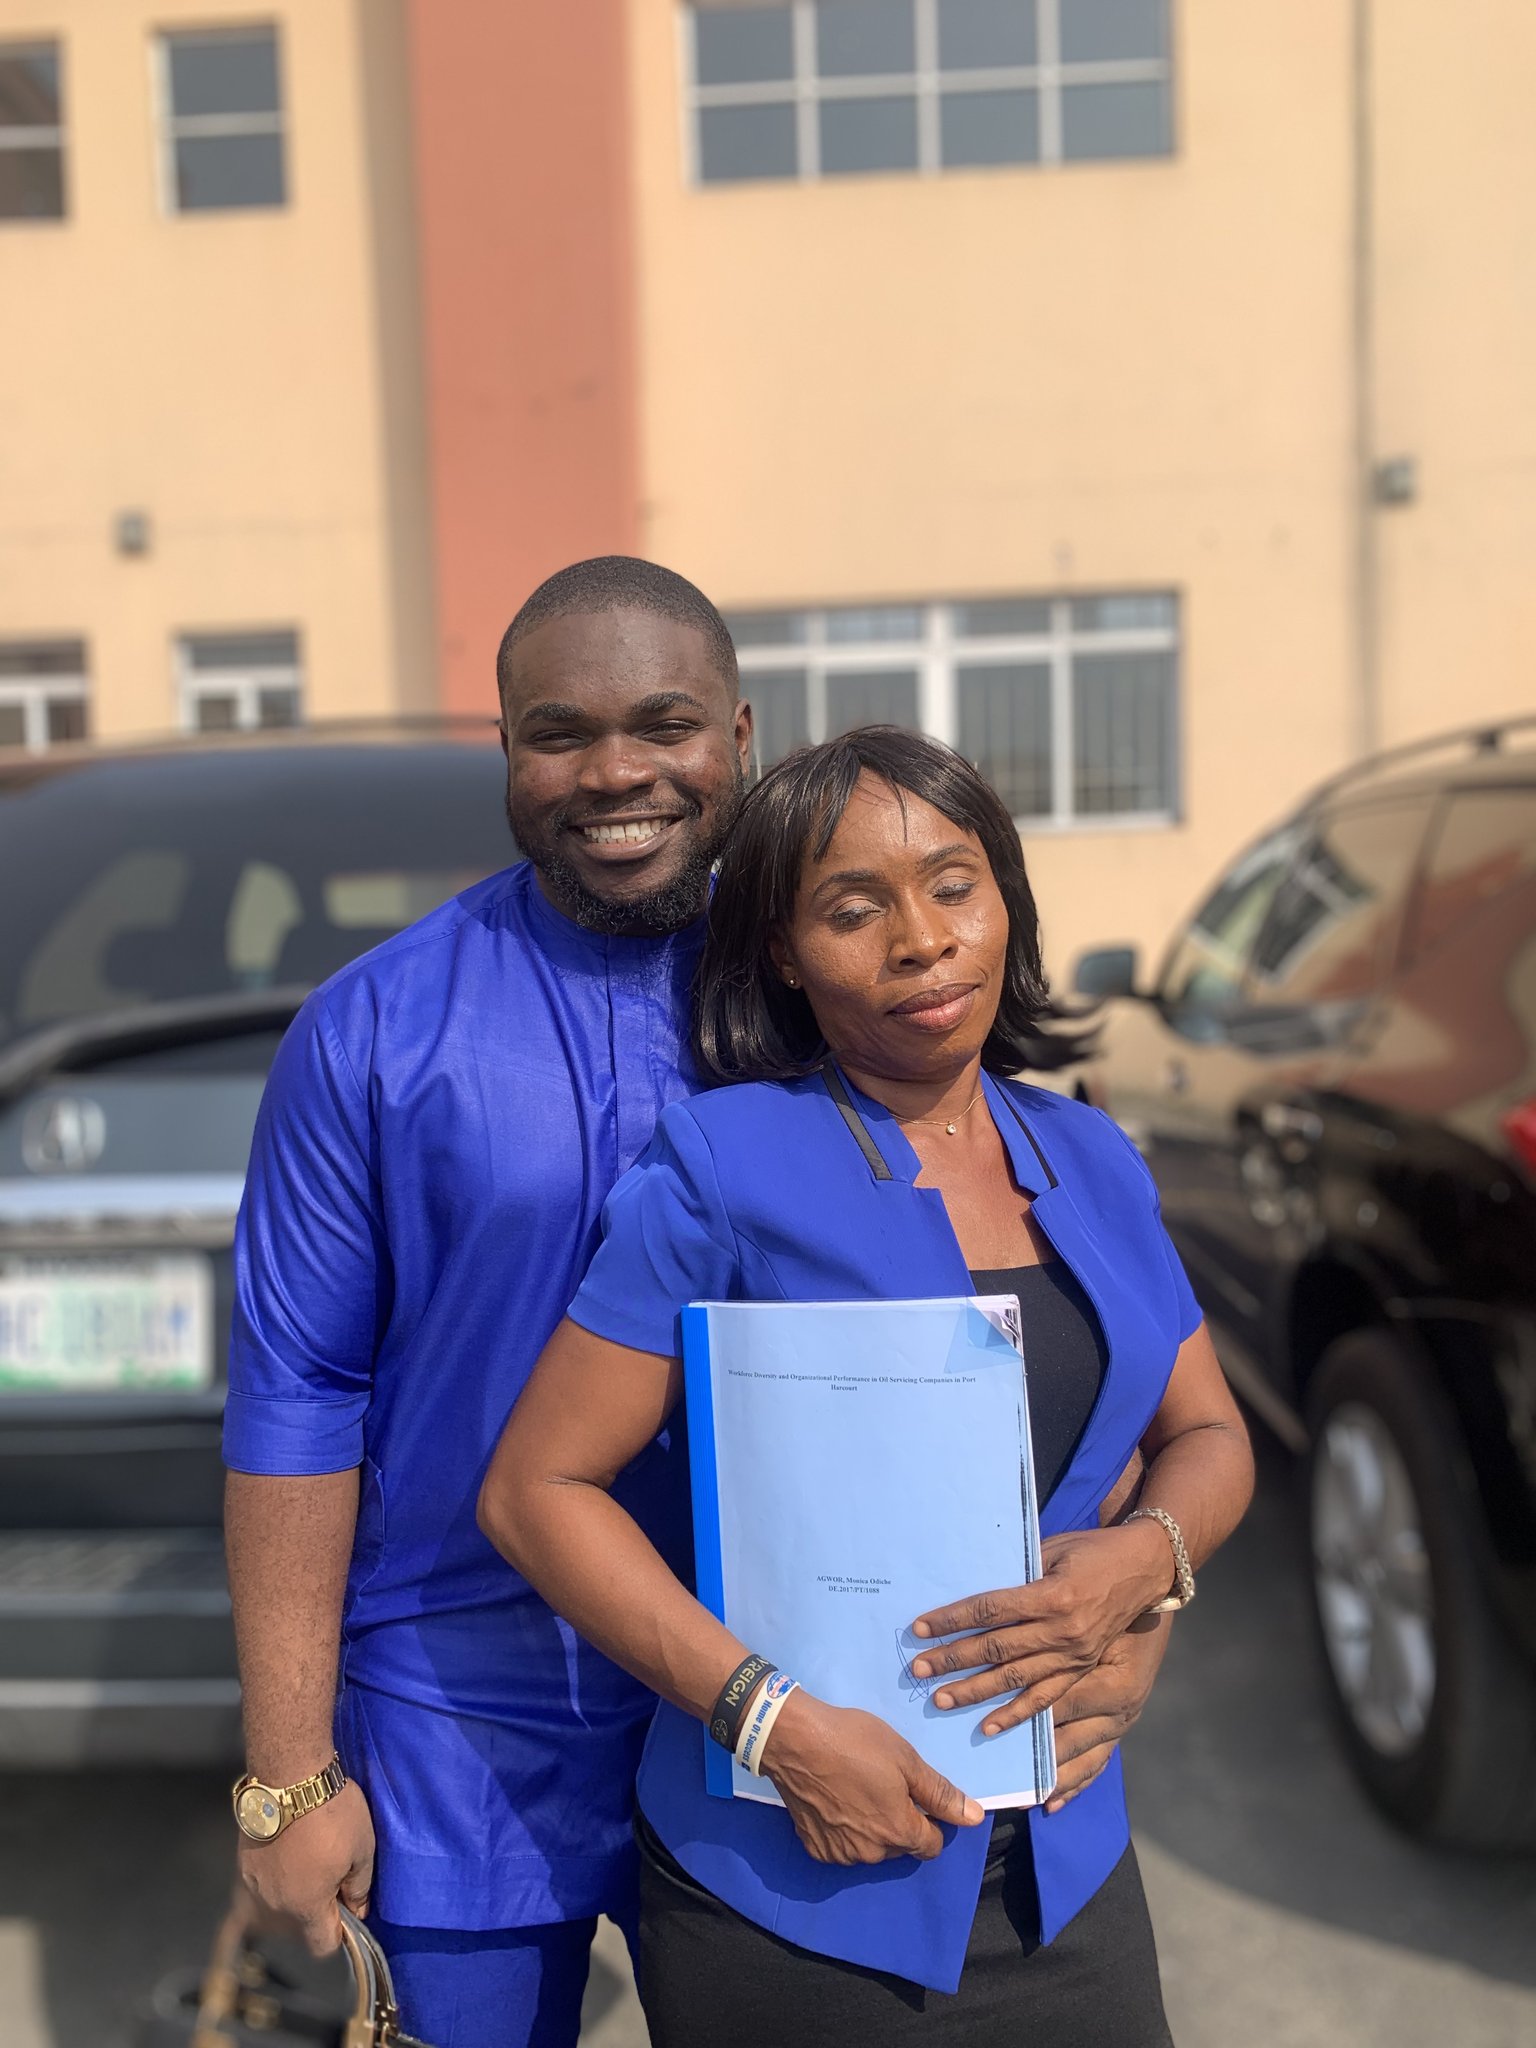 Man celebrates his mom becoming a graduate 20 years after dropping out to cater for him - man mother graduation 20 years3